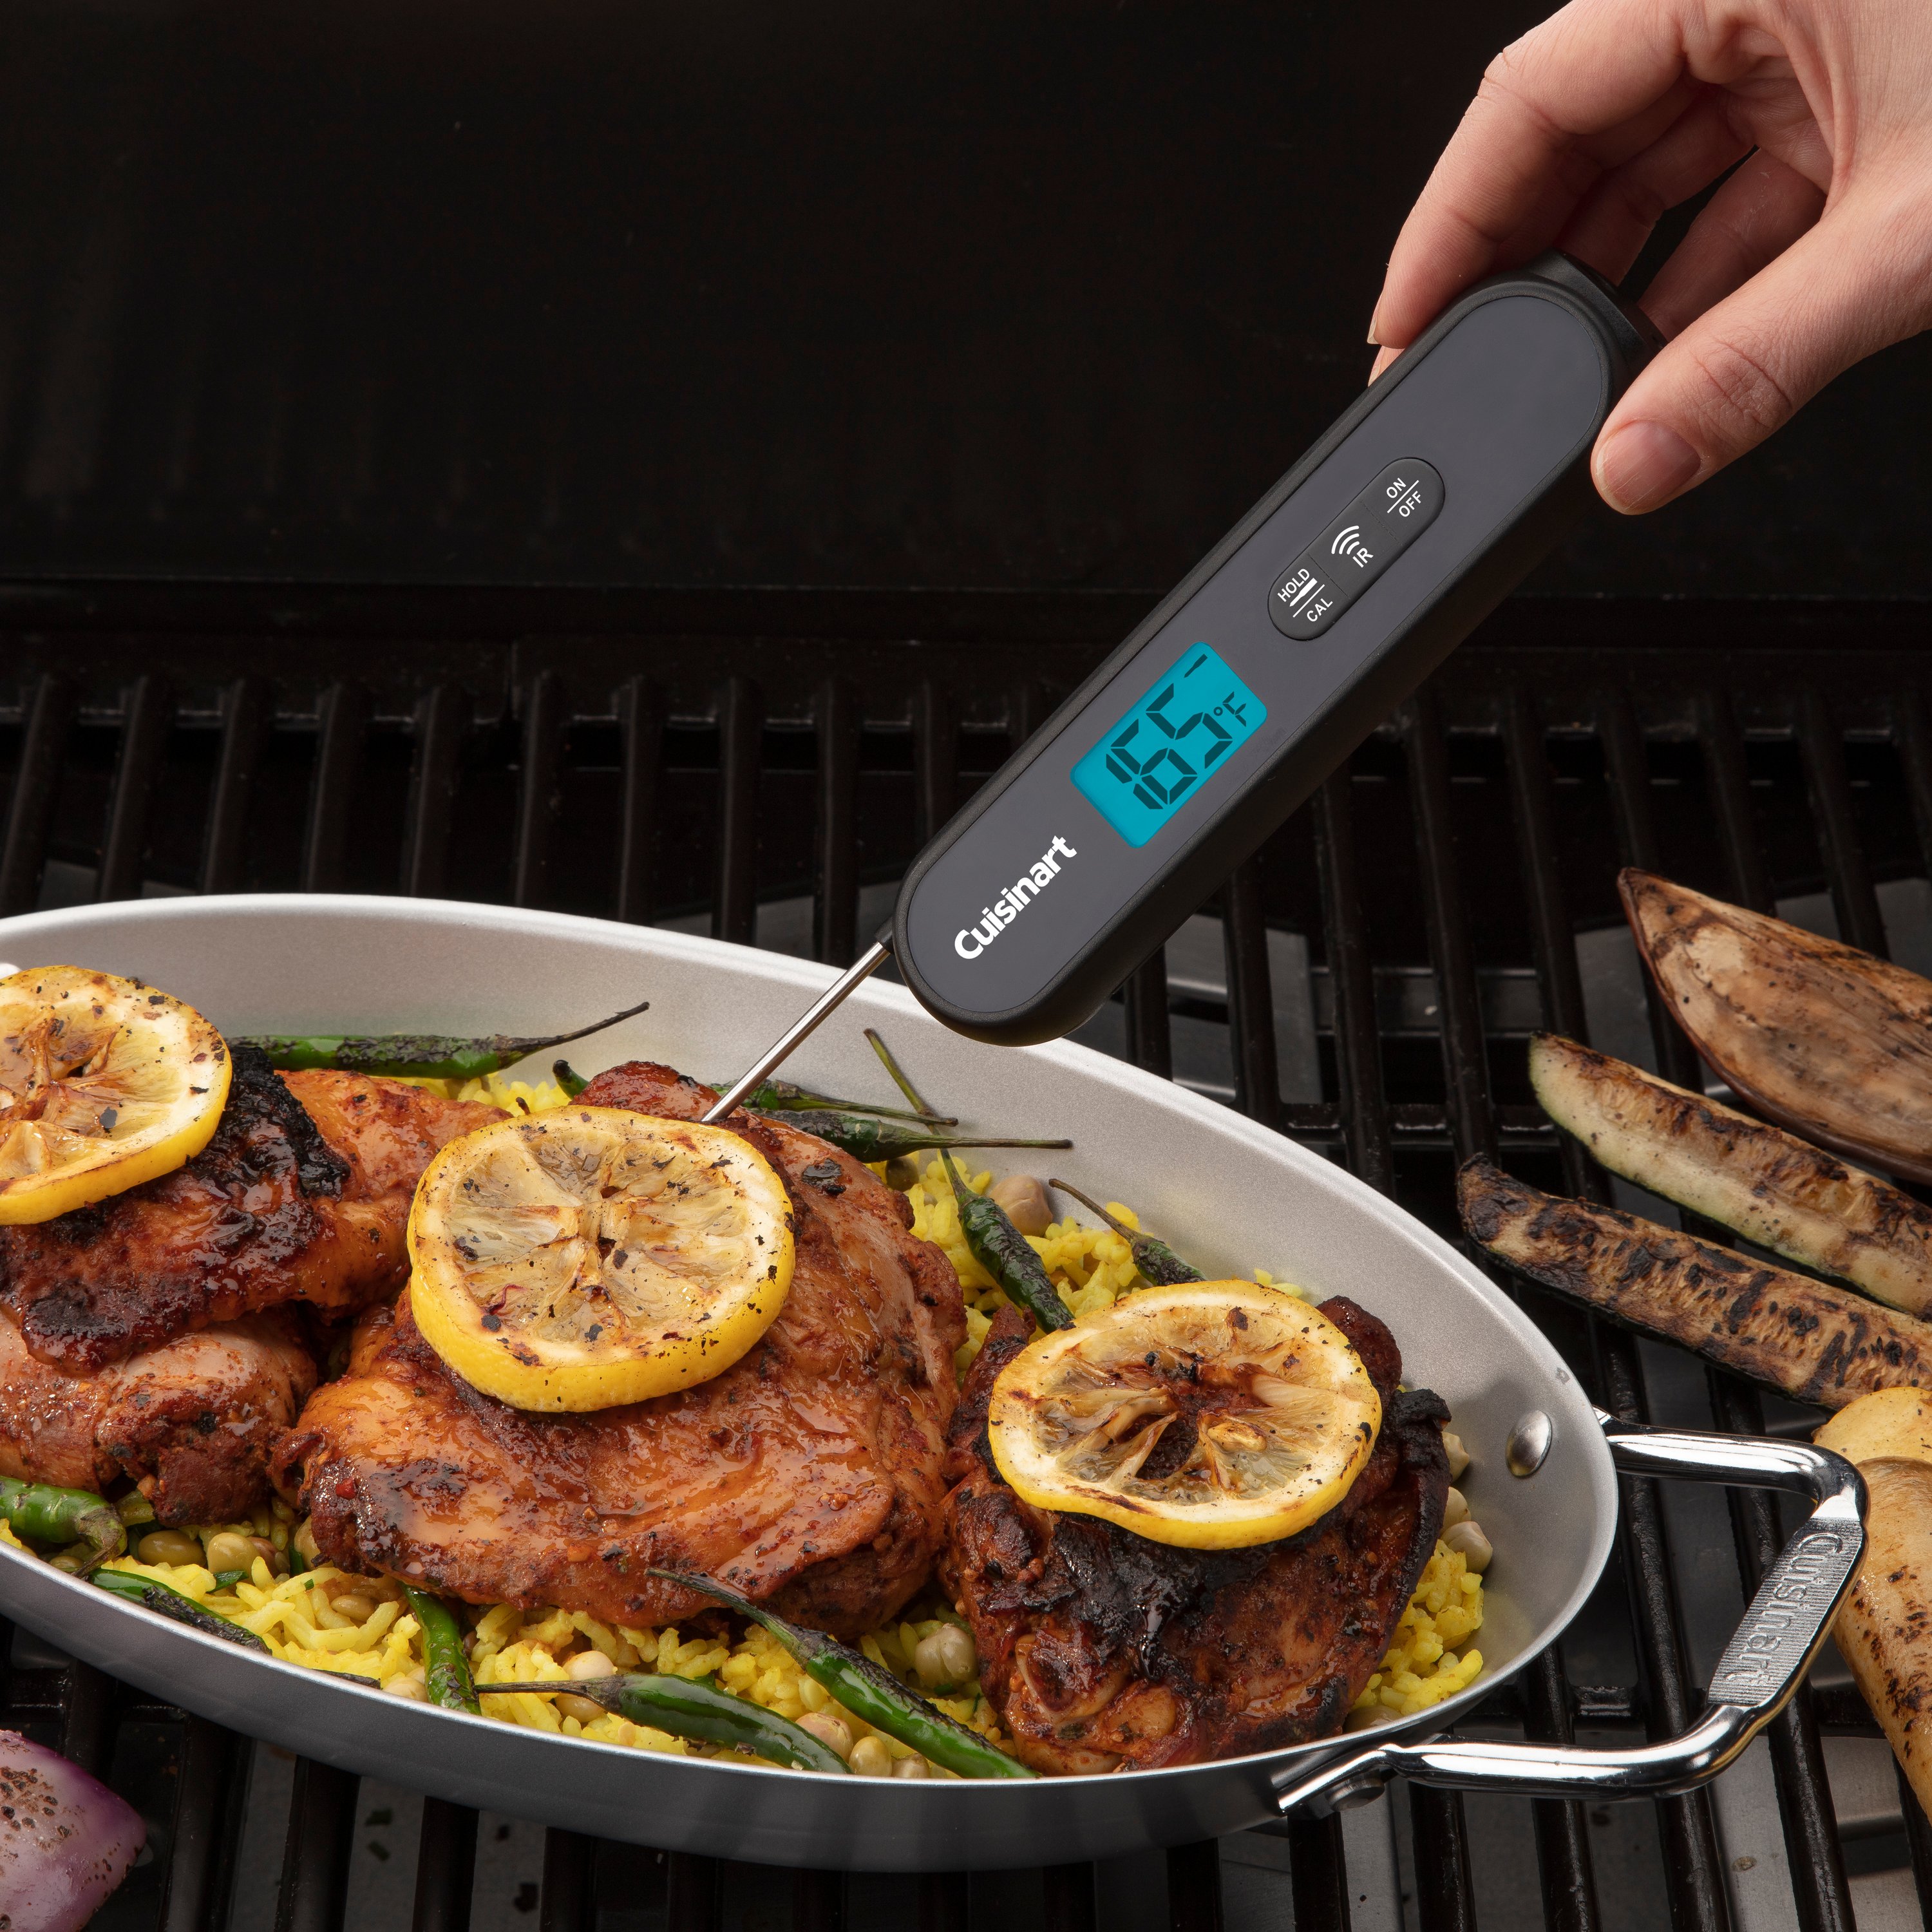 https://www.cuisinart.com/globalassets/catalog/outdoor-grilling/gadgets-and-thermometers/csg-200-probe-chicken_3000.jpg